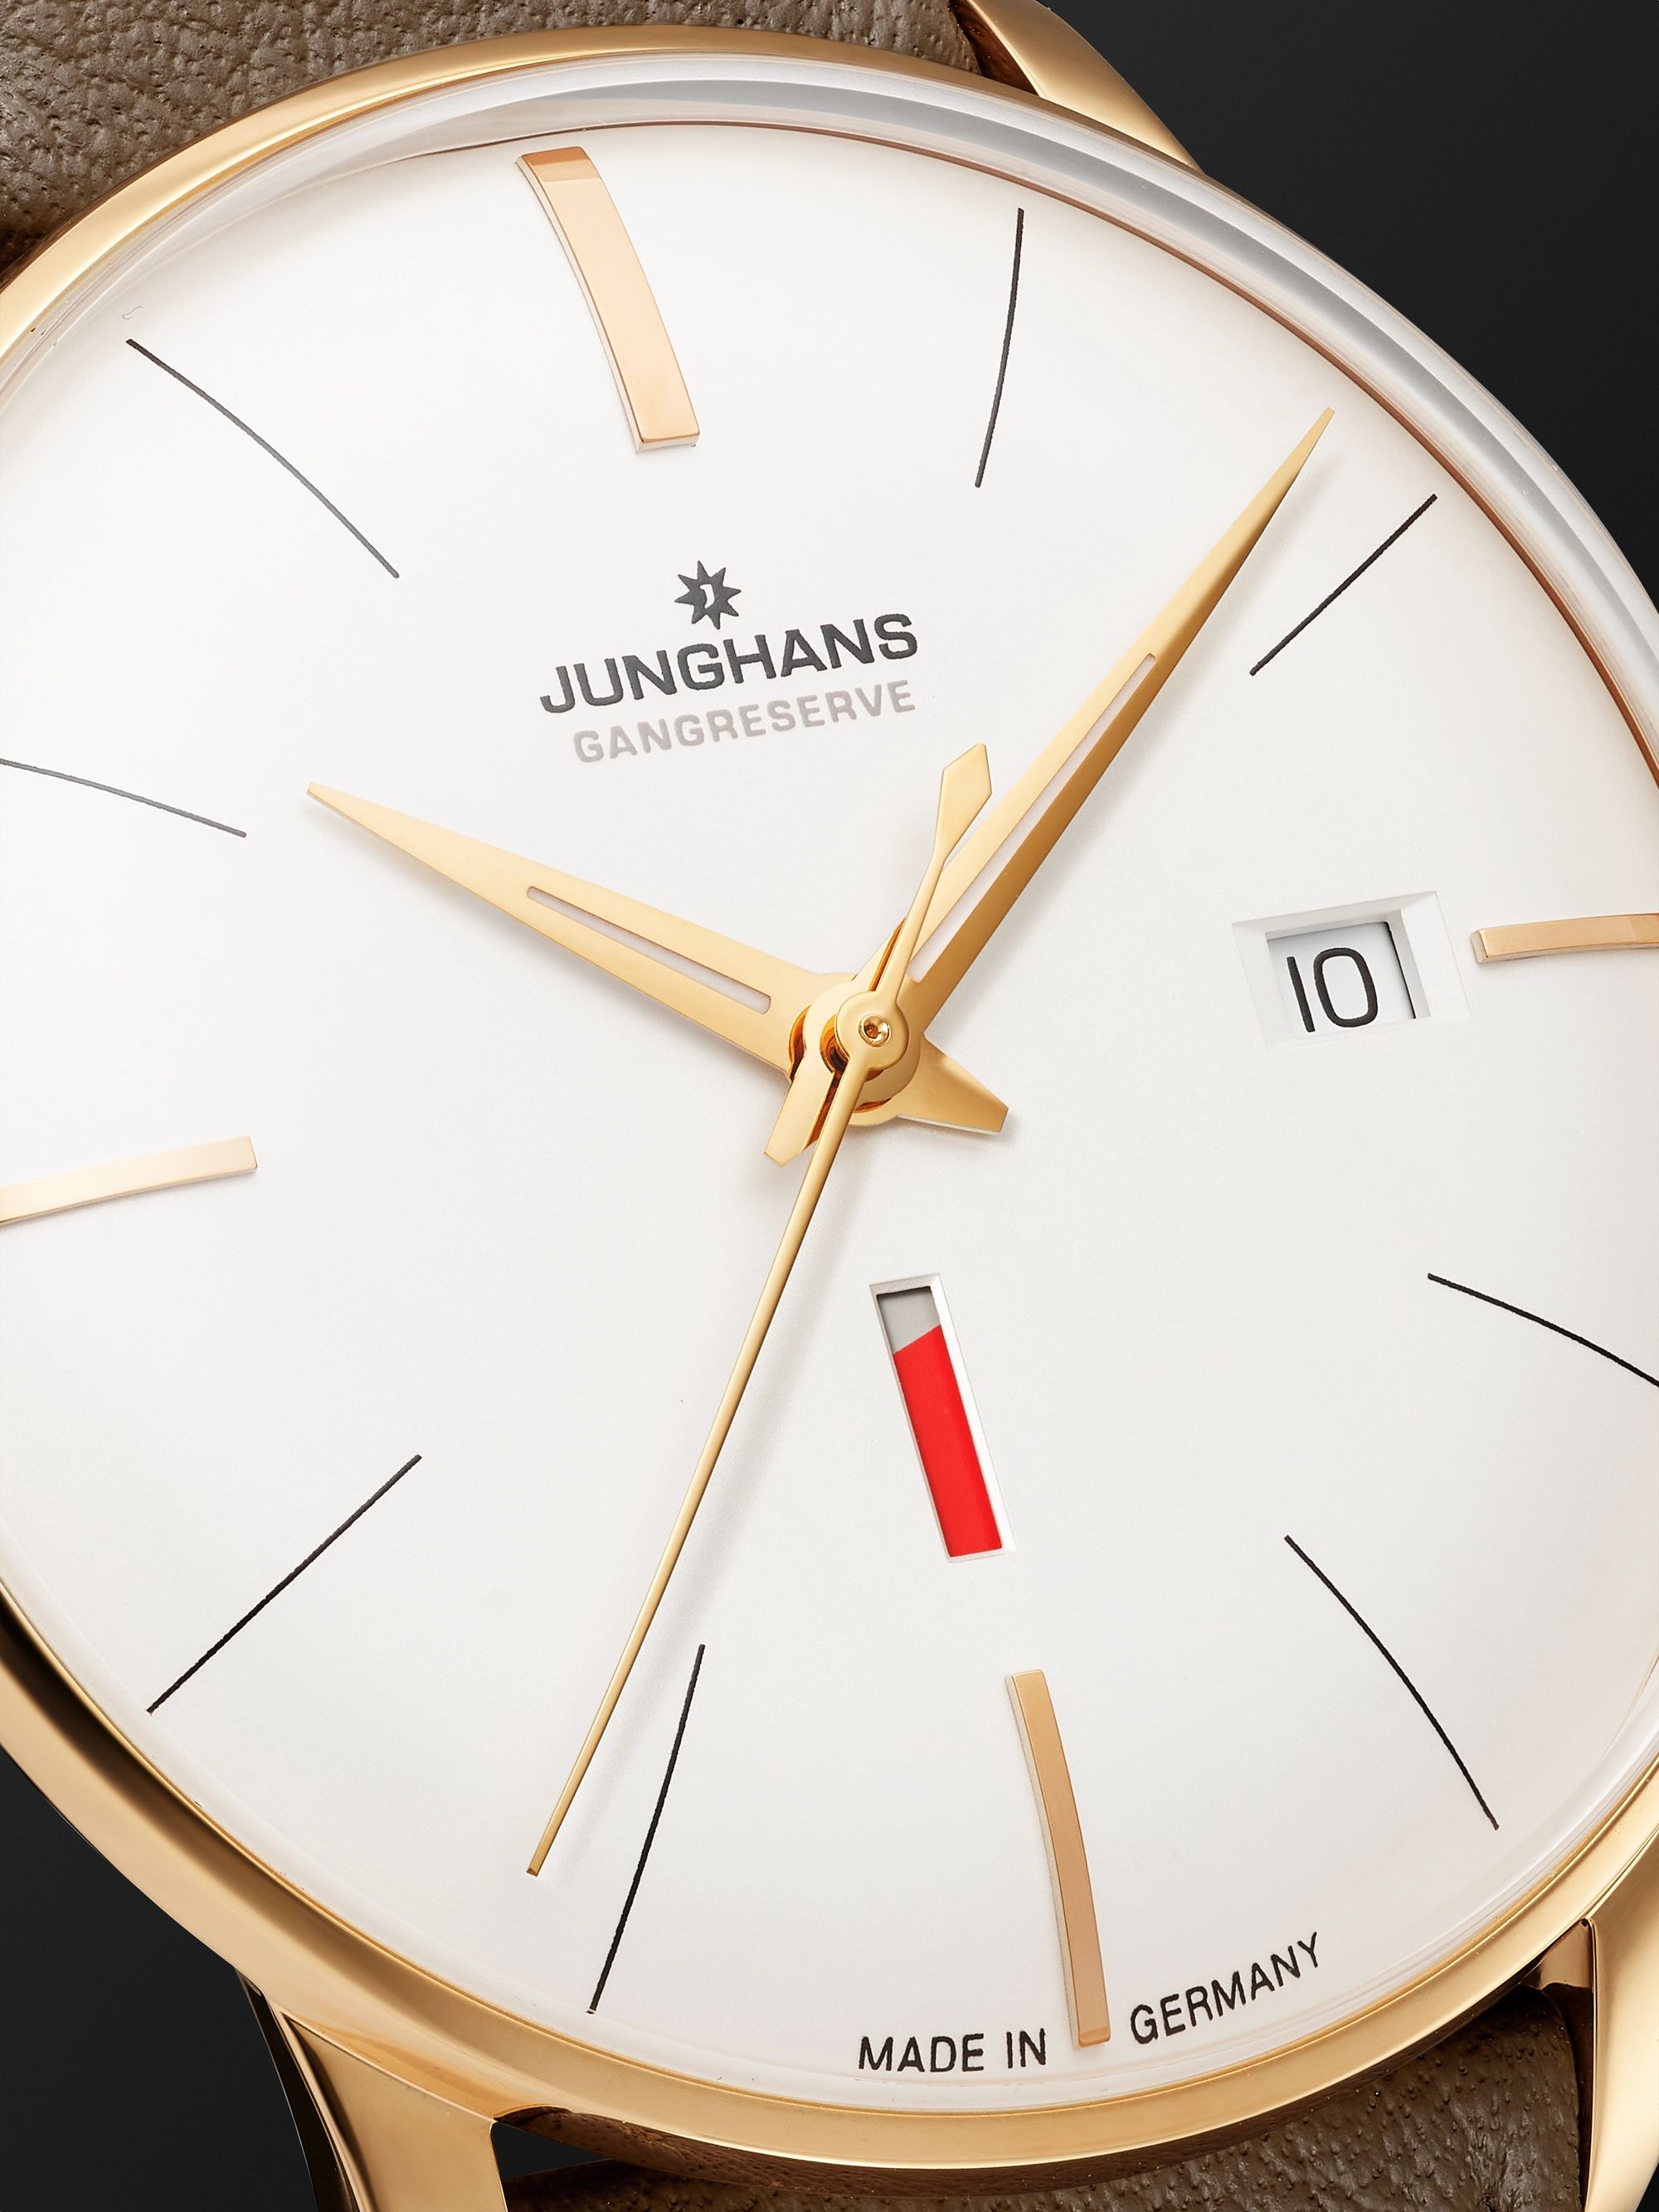 JUNGHANS Meister Gangreserve Edition 160 Automatic 40.4mm Stainless Steel and Leather Watch, Ref. No. 27/7113.02